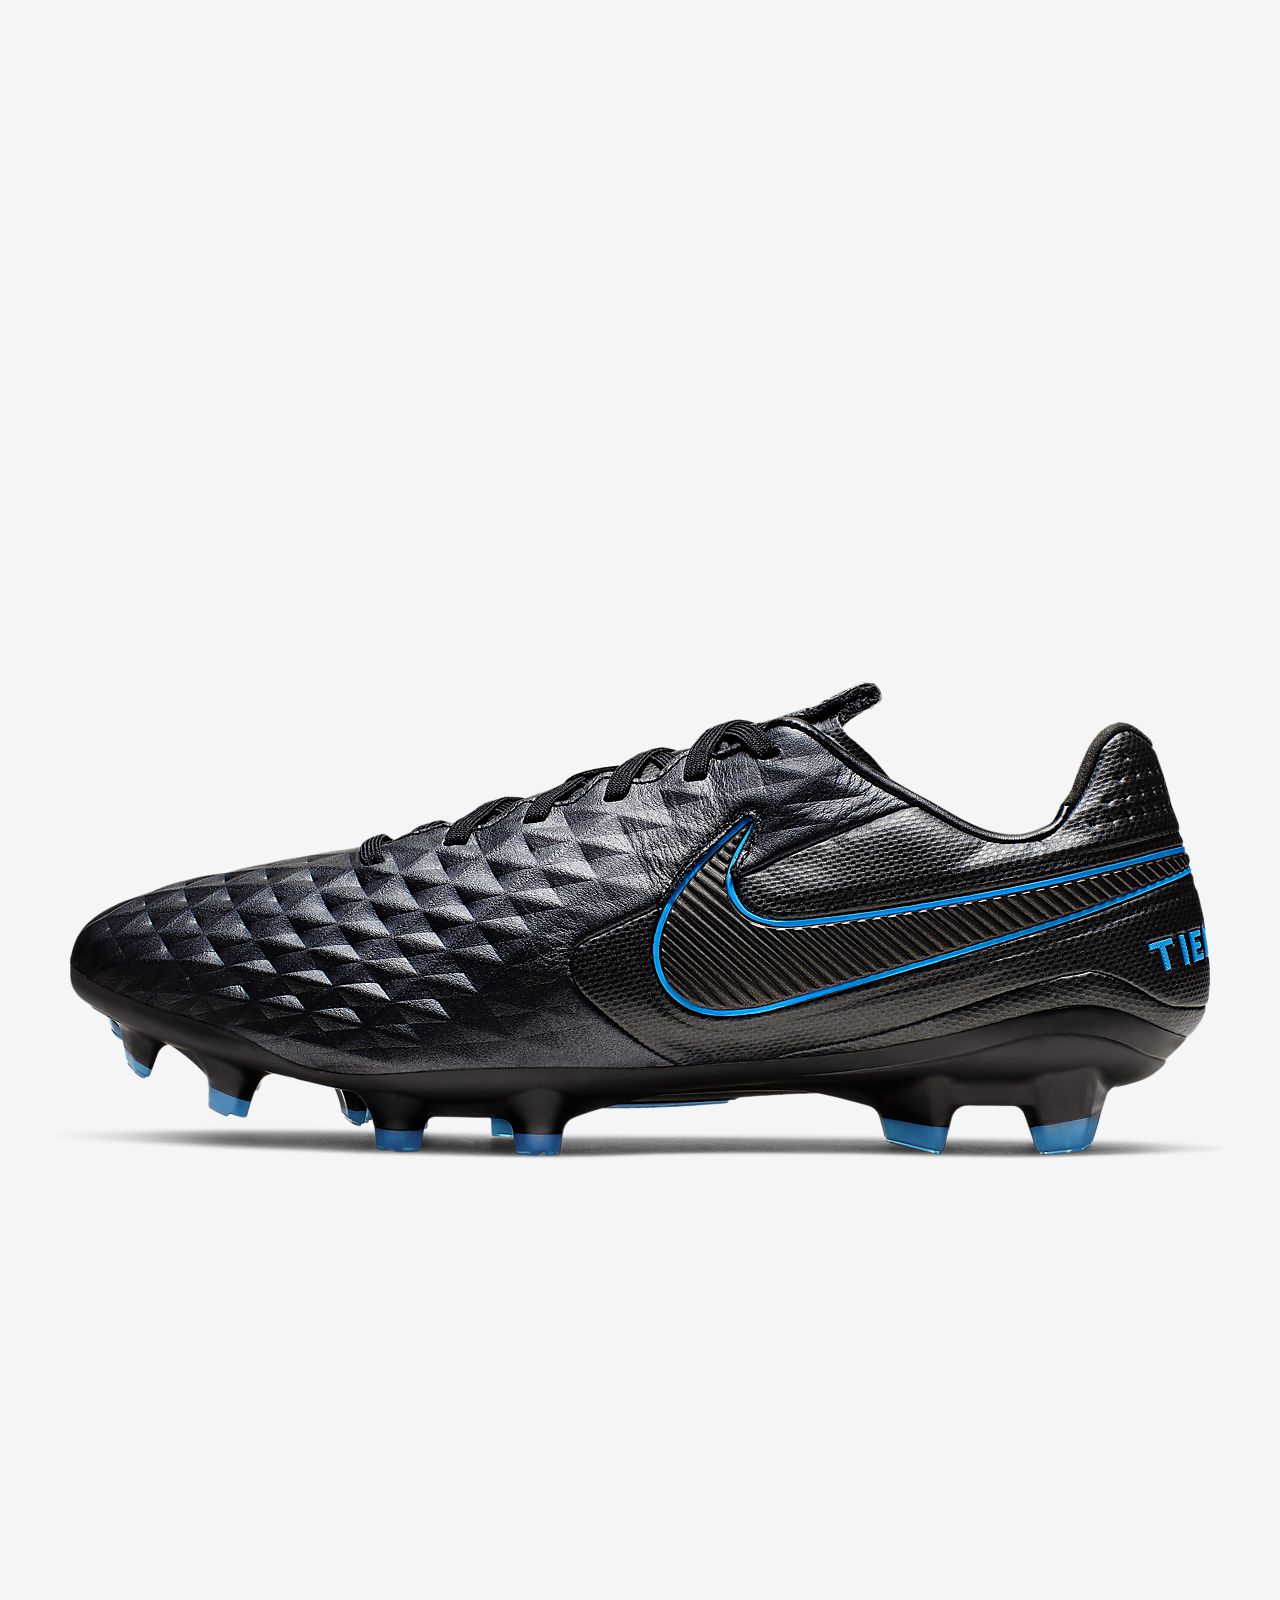 Nike Tiempo Legend 8 Play Test and Review.Youtube